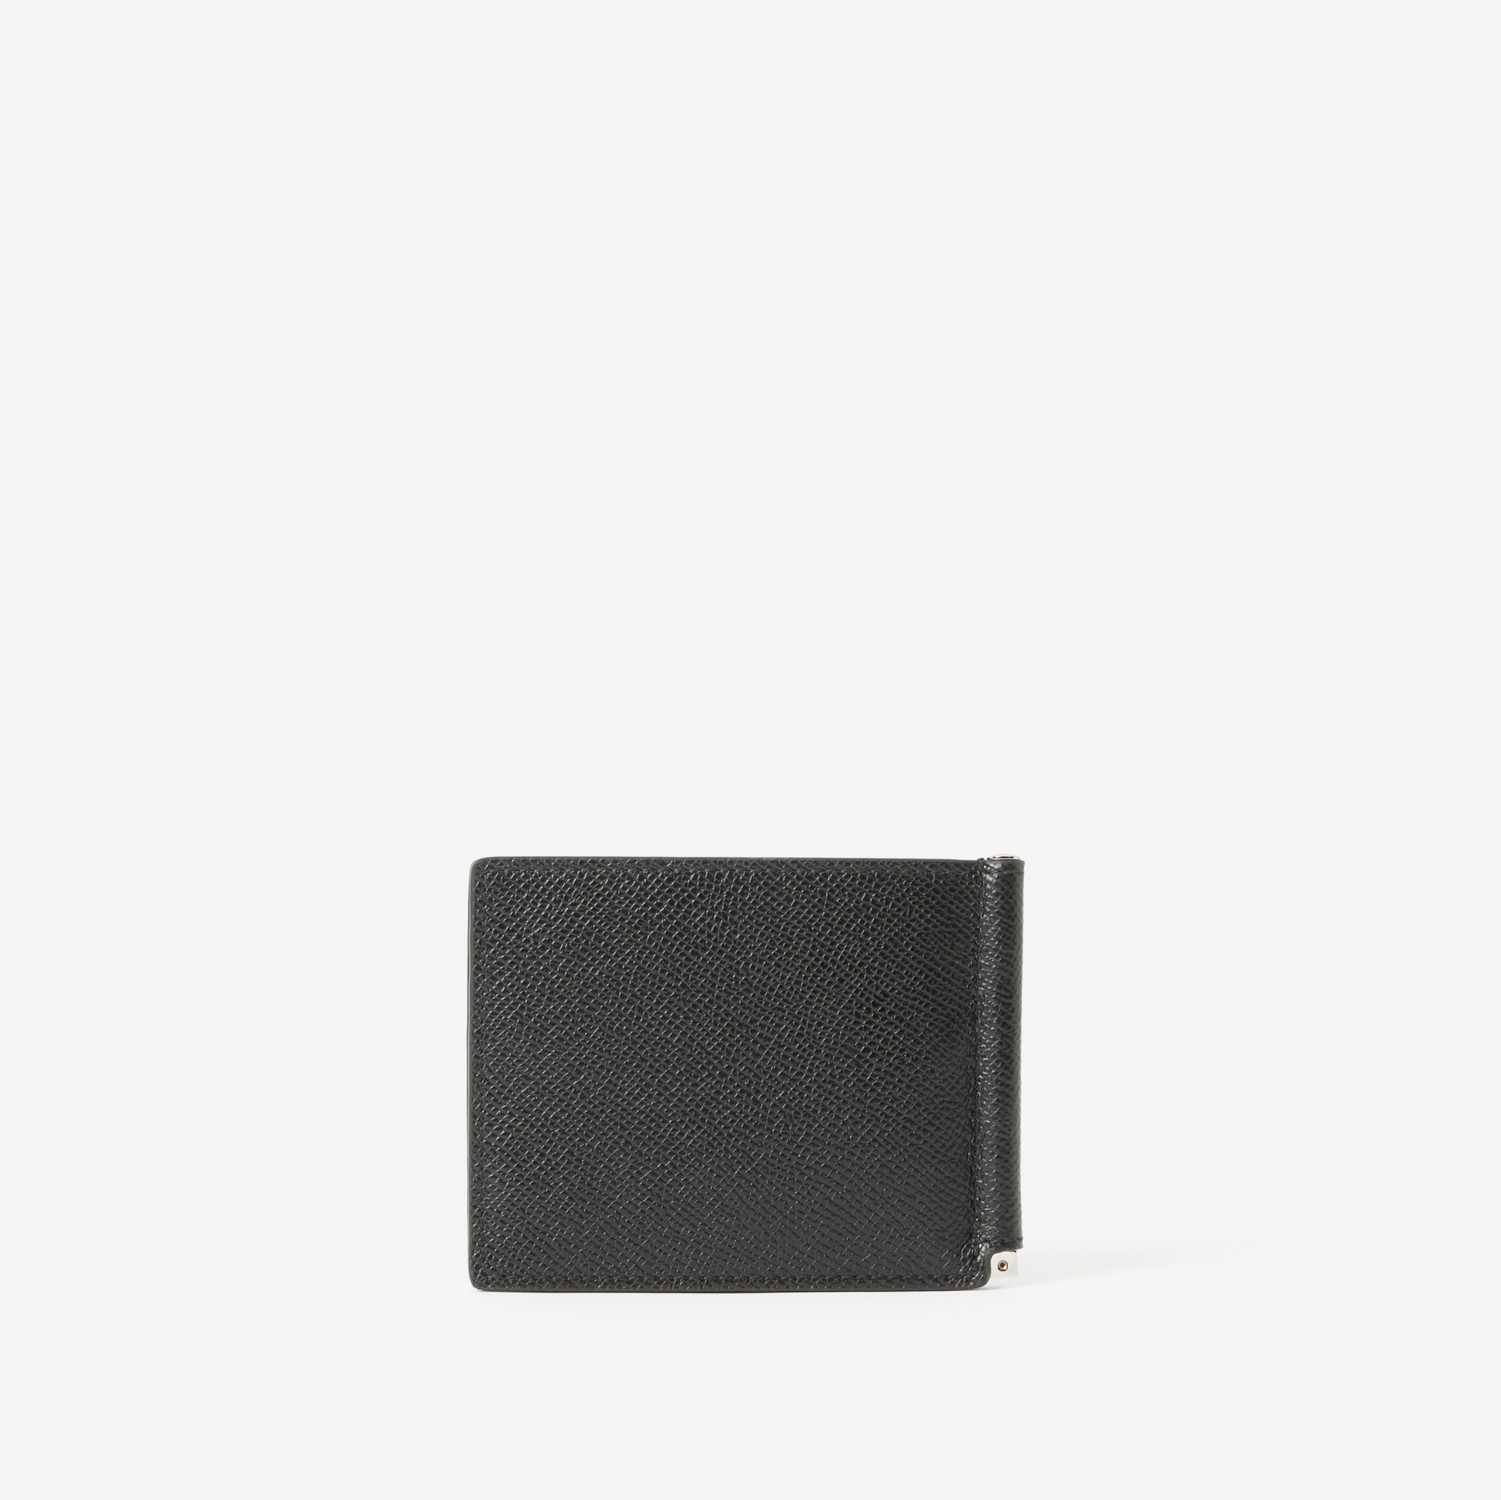 Grainy Leather TB Money Clip Wallet in Black - Men | Burberry® Official